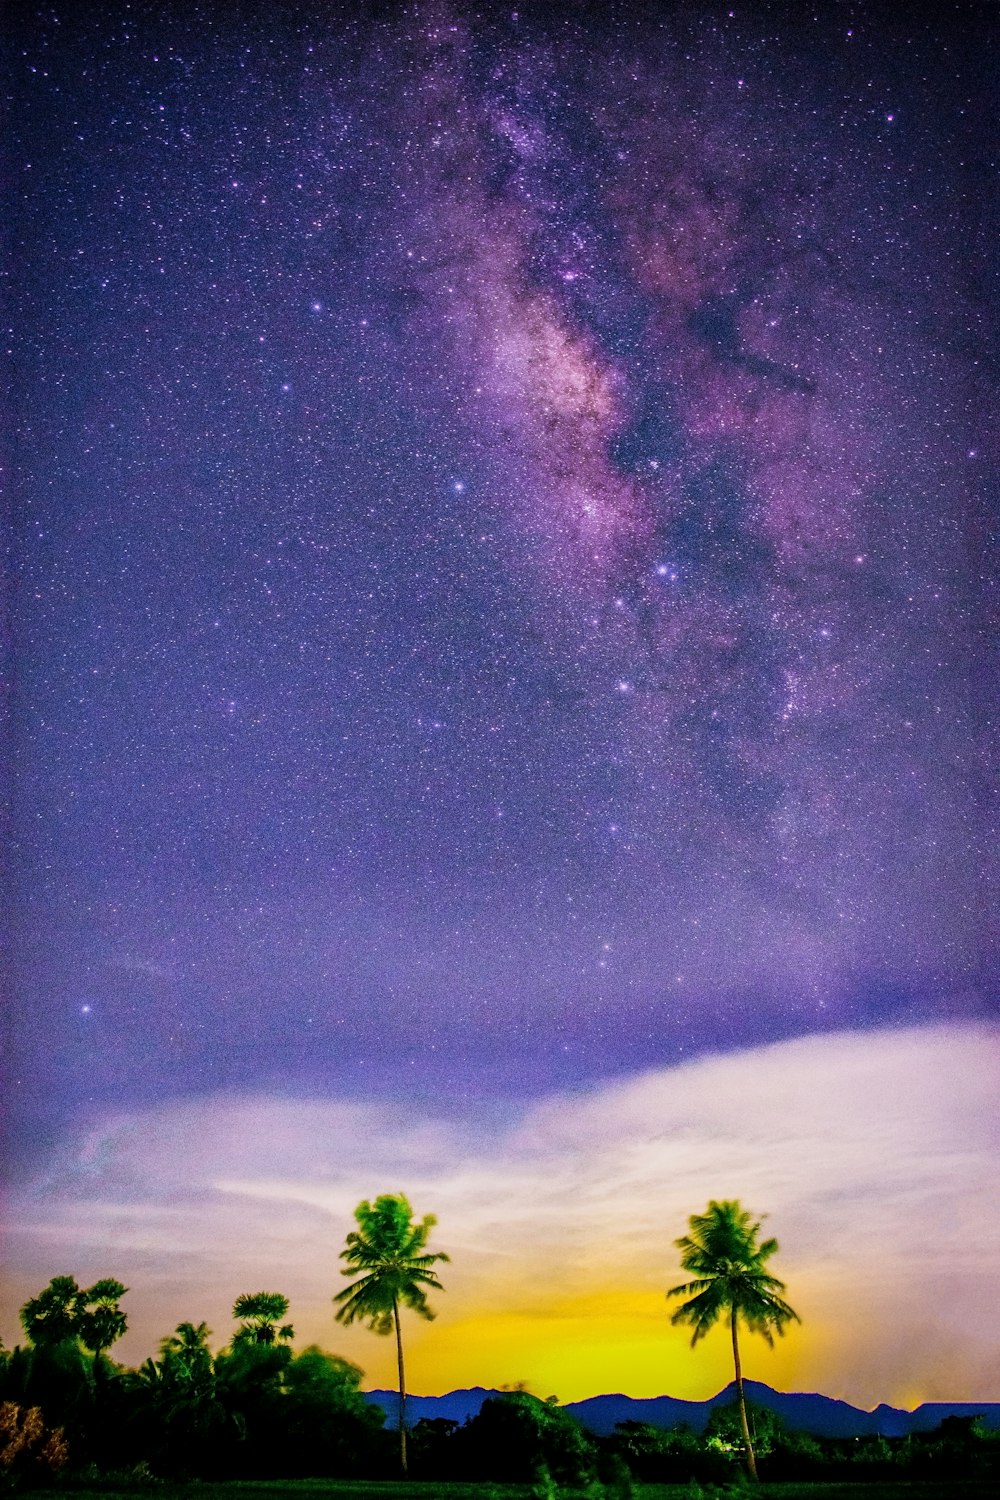 the night sky is filled with stars and palm trees